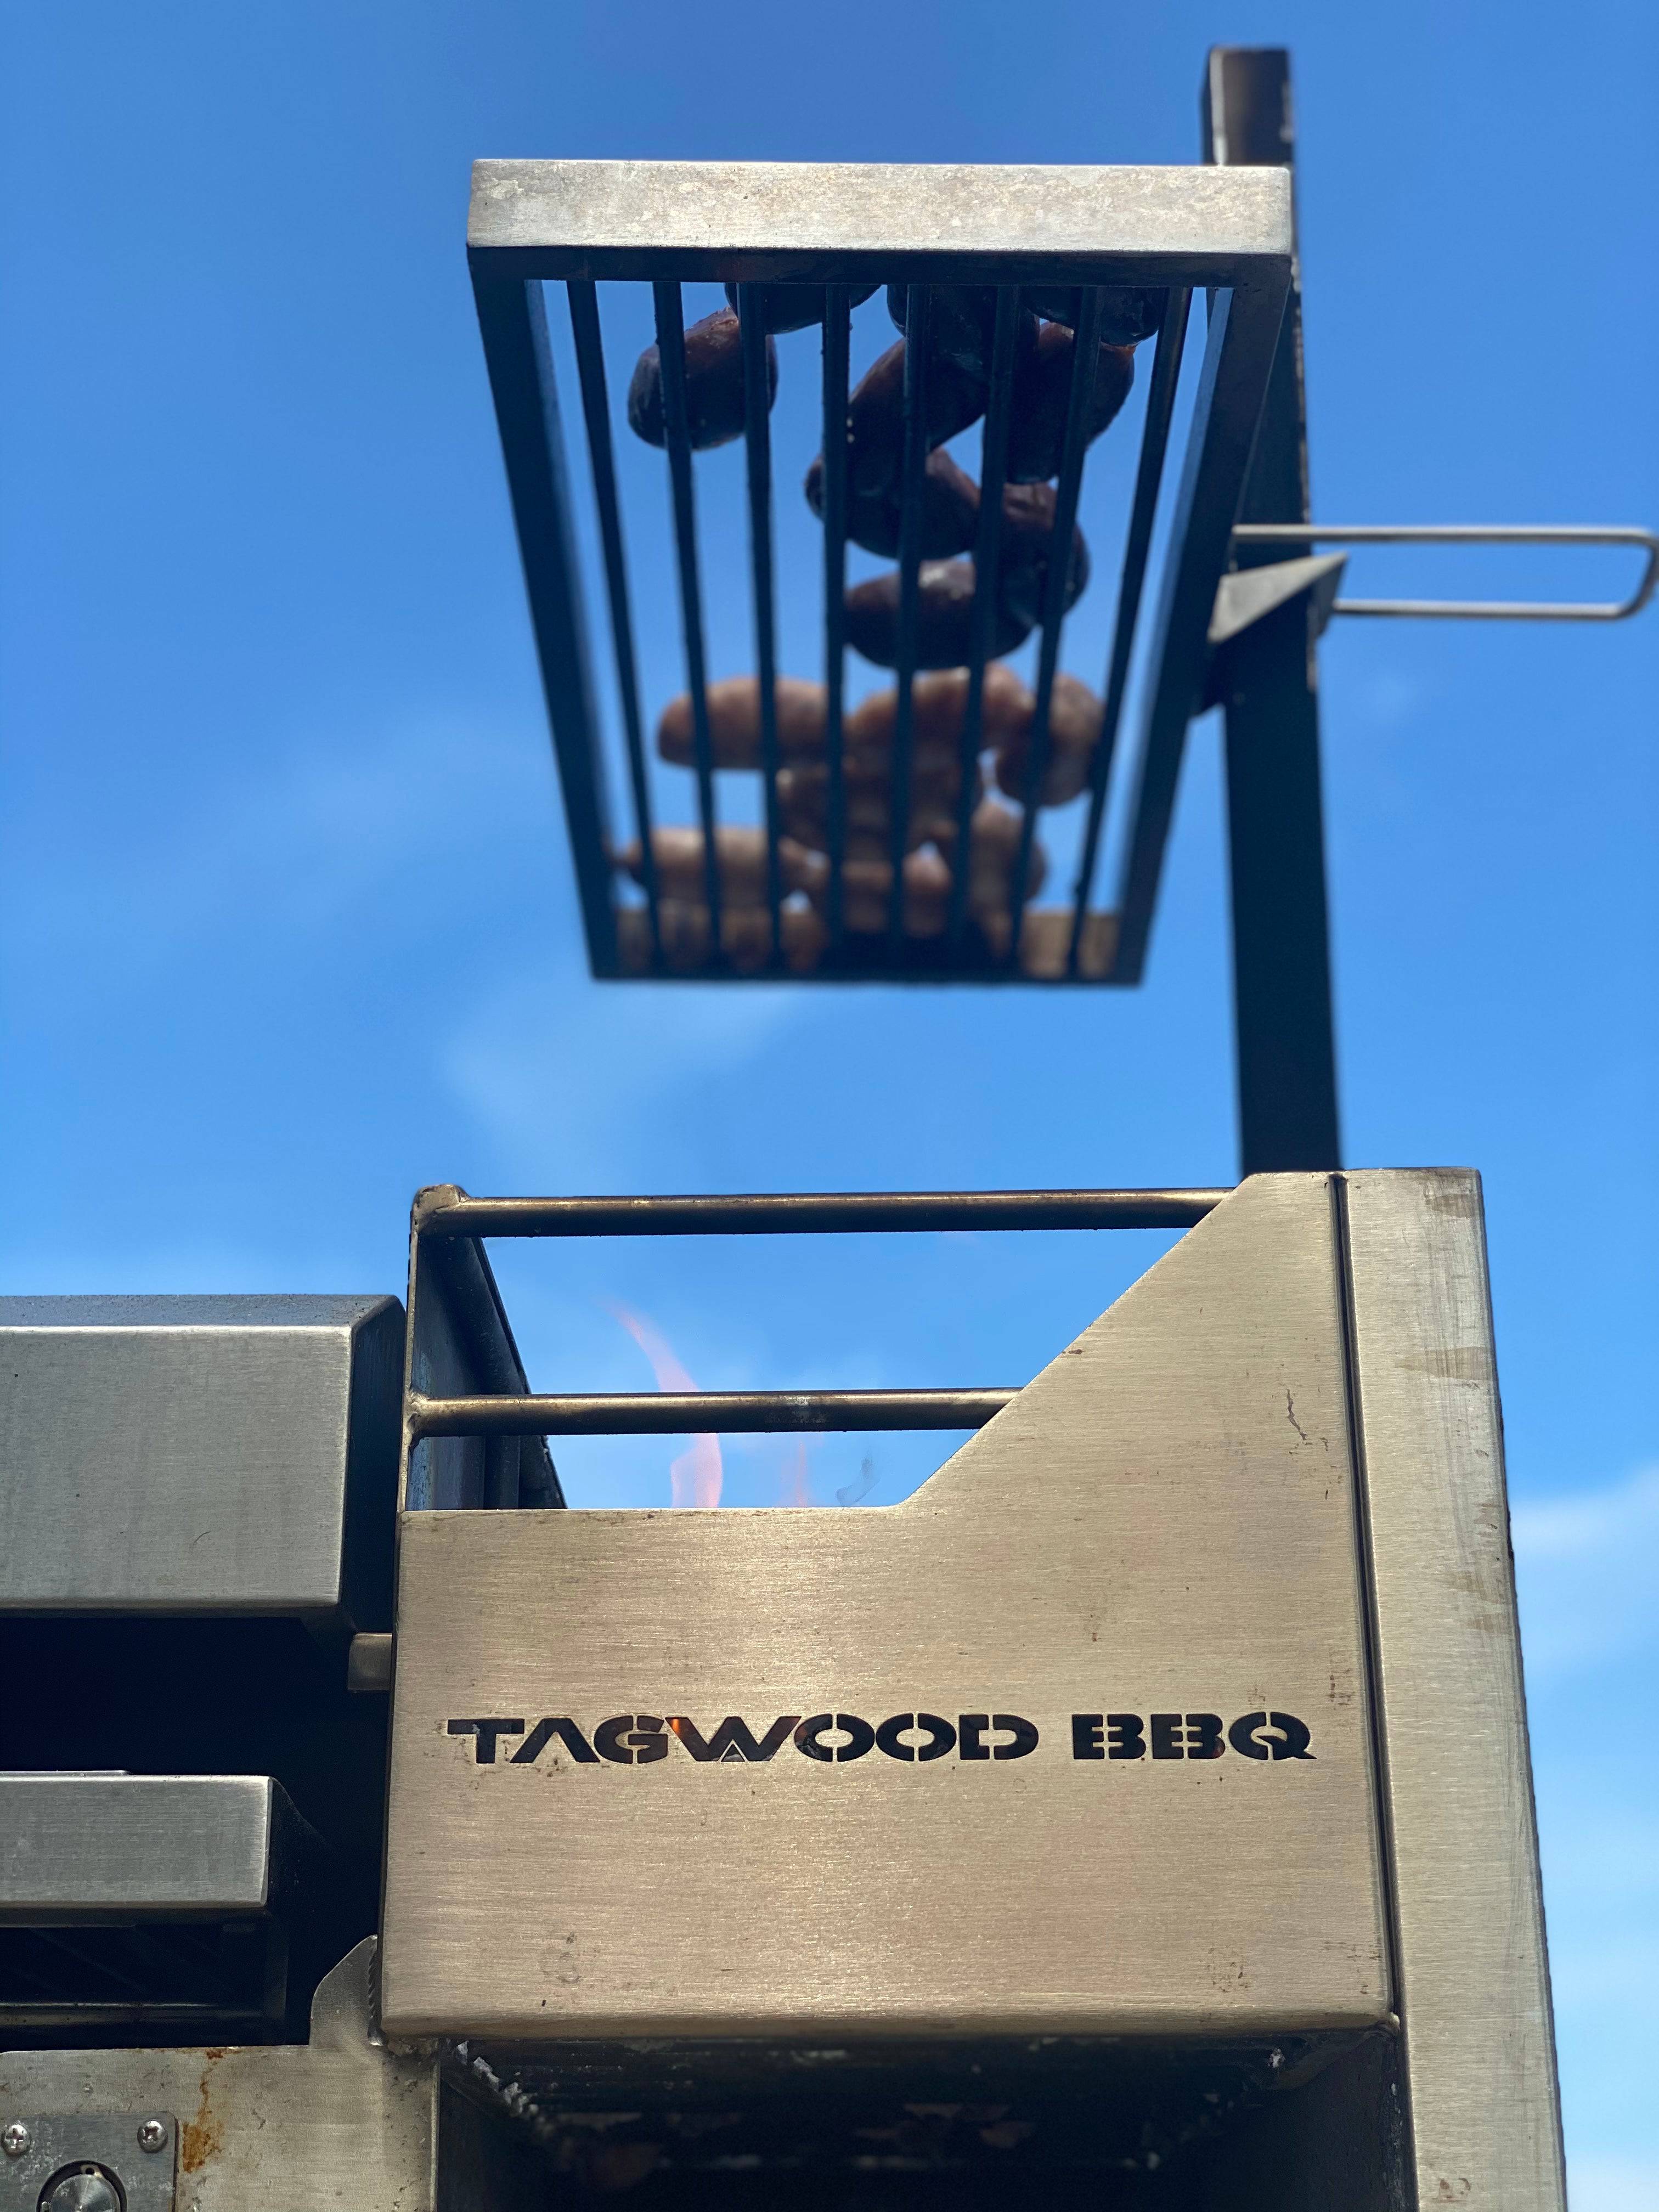 Height Adjustable Secondary Grate - tagwoodbbq